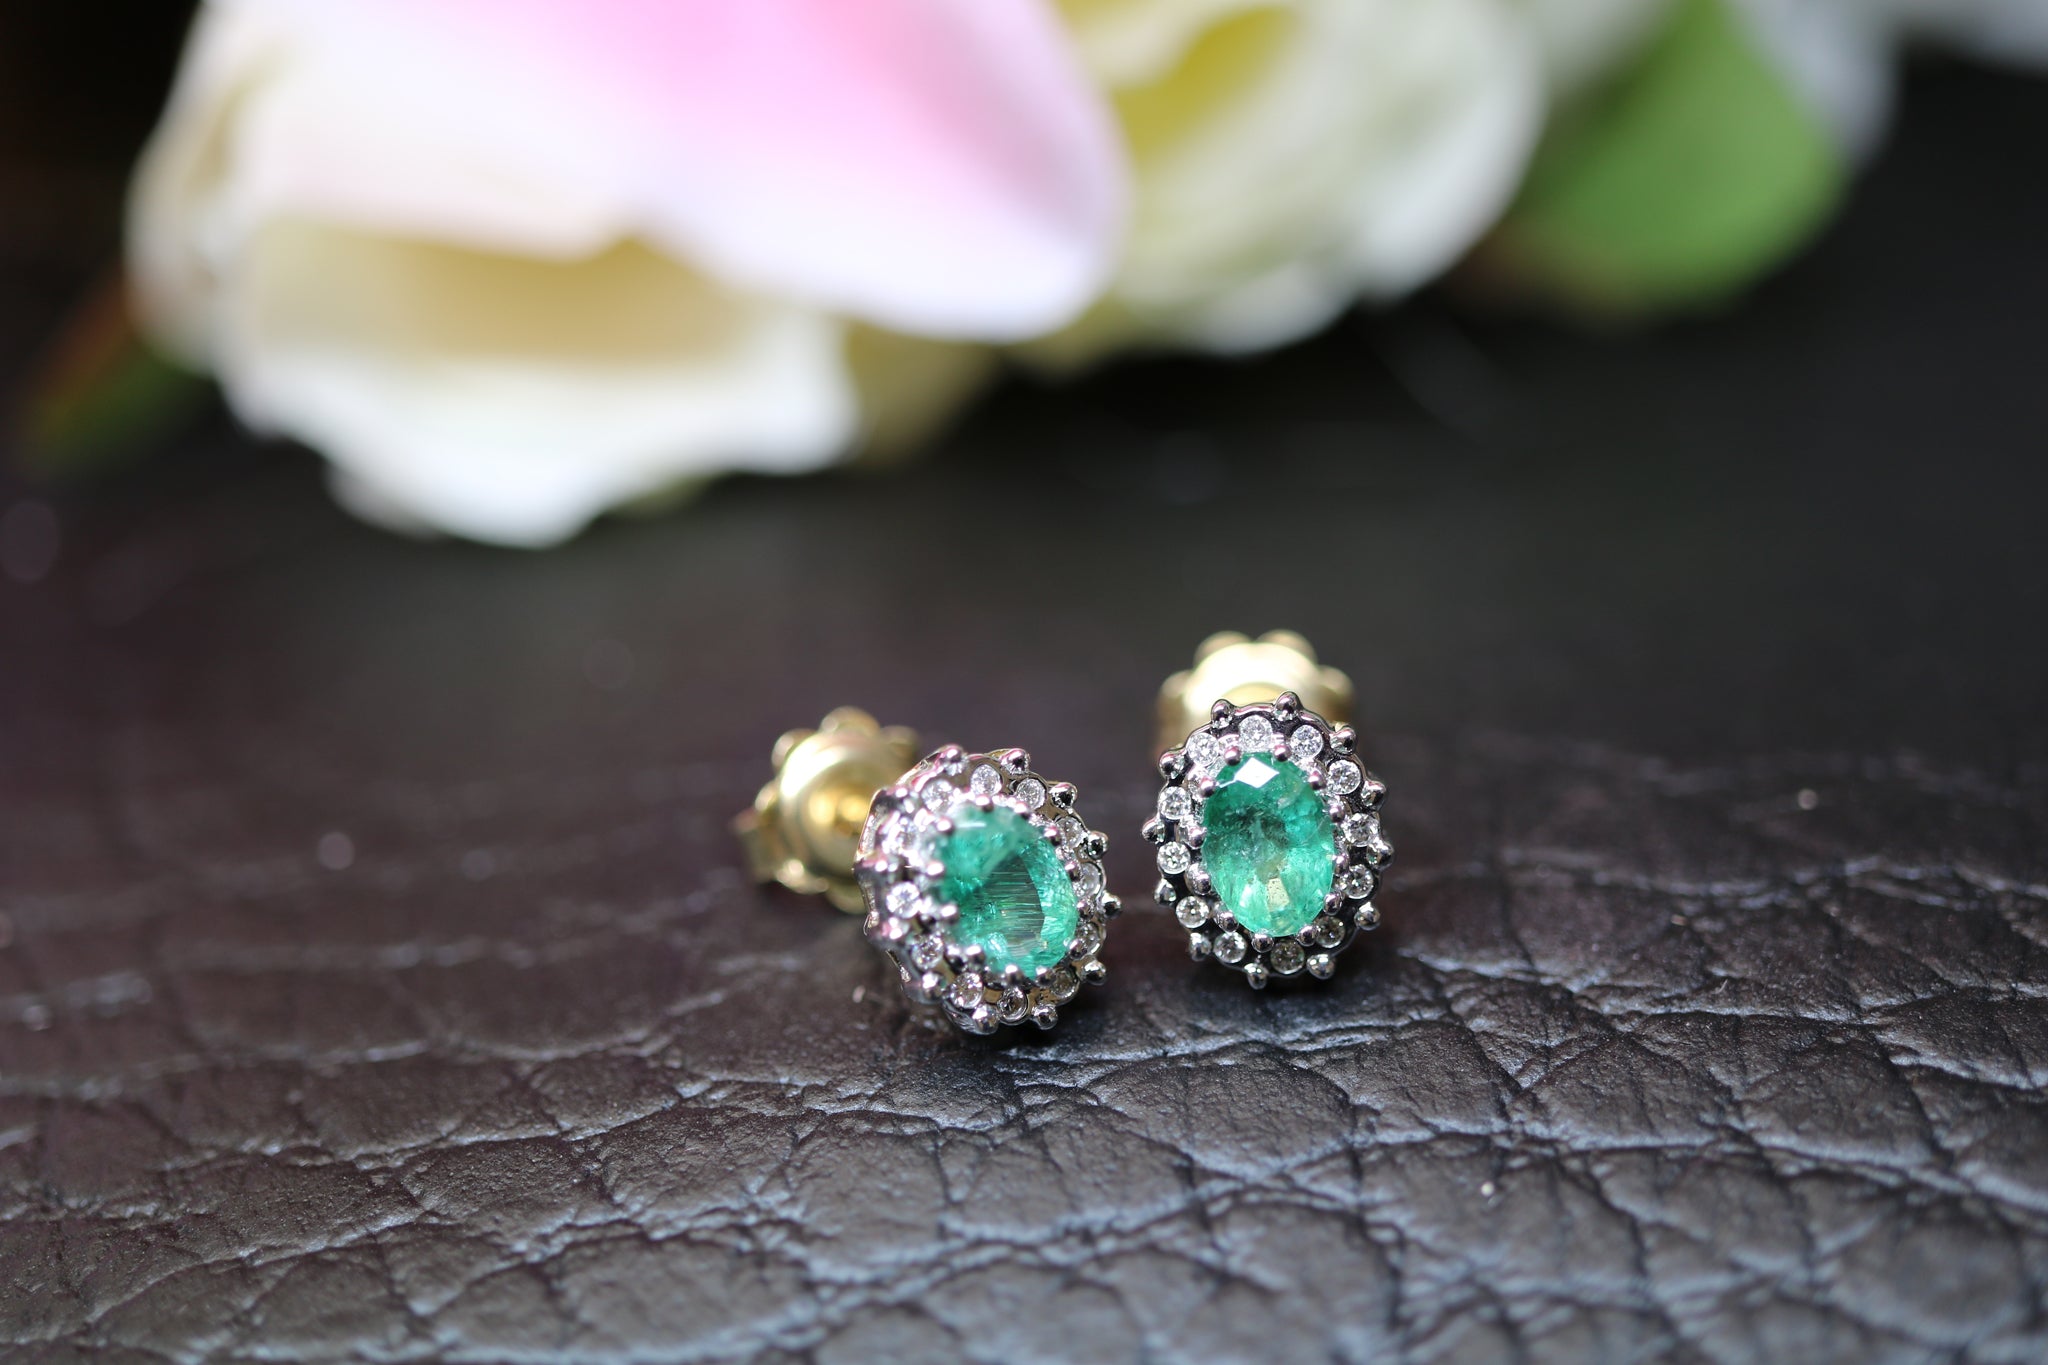 9ct Yellow Gold Emerald & Diamond Earrings - Hallmark Jewellers Formby & The Jewellers Bench Widnes